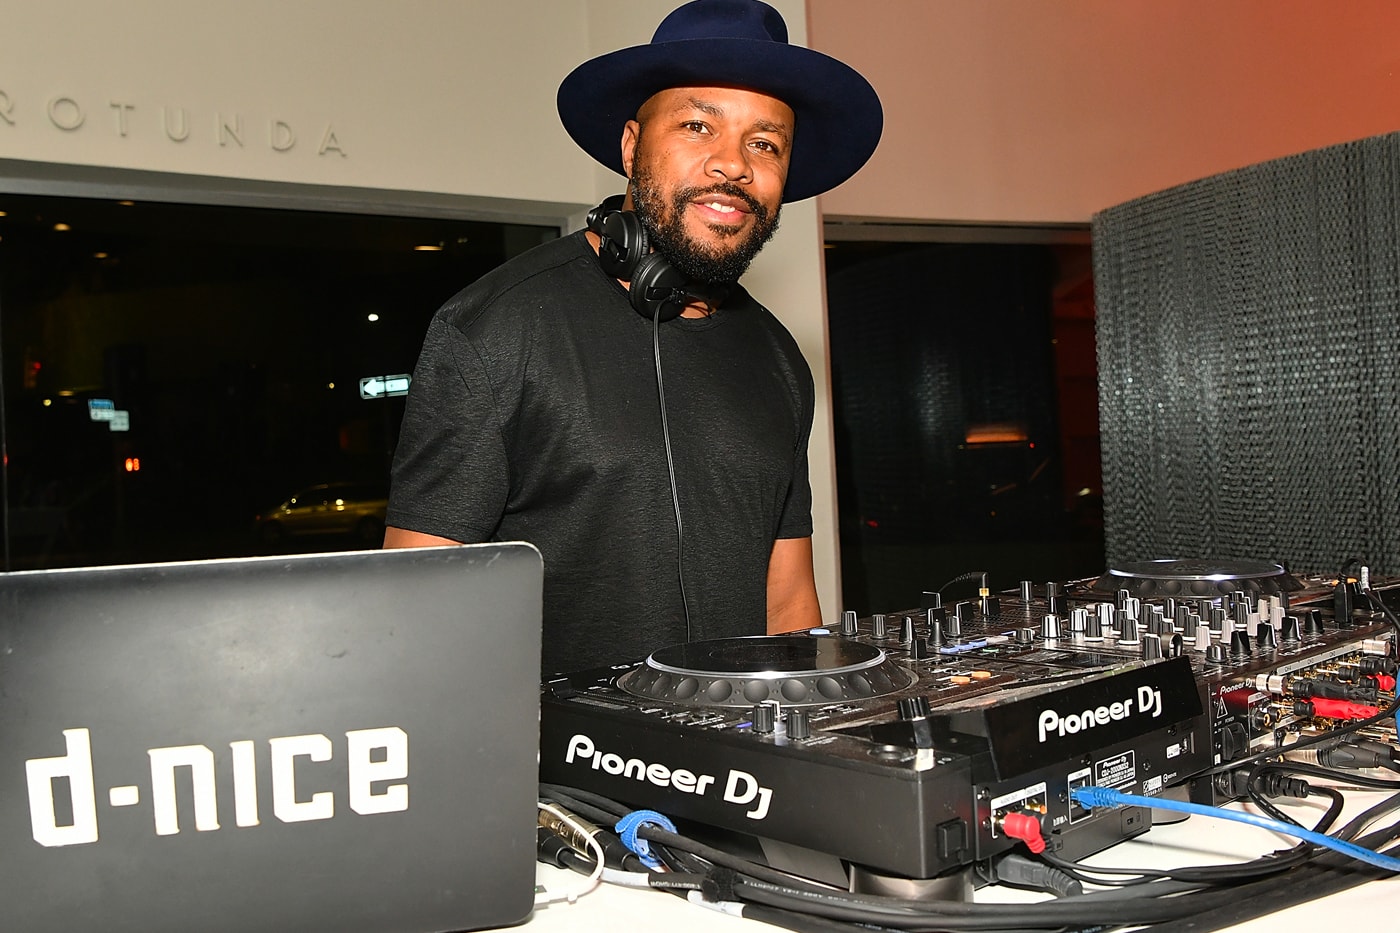 DJ D-Nice Shares "Homeschool" Dance Party Playlist Emotions “Best of My Love,” Sylvester “You Make Me Feel Mighty Real,” and Stevie Wonder “All I Do.” hip-hop rap funk jazz soul R&B quarantine self-isolation